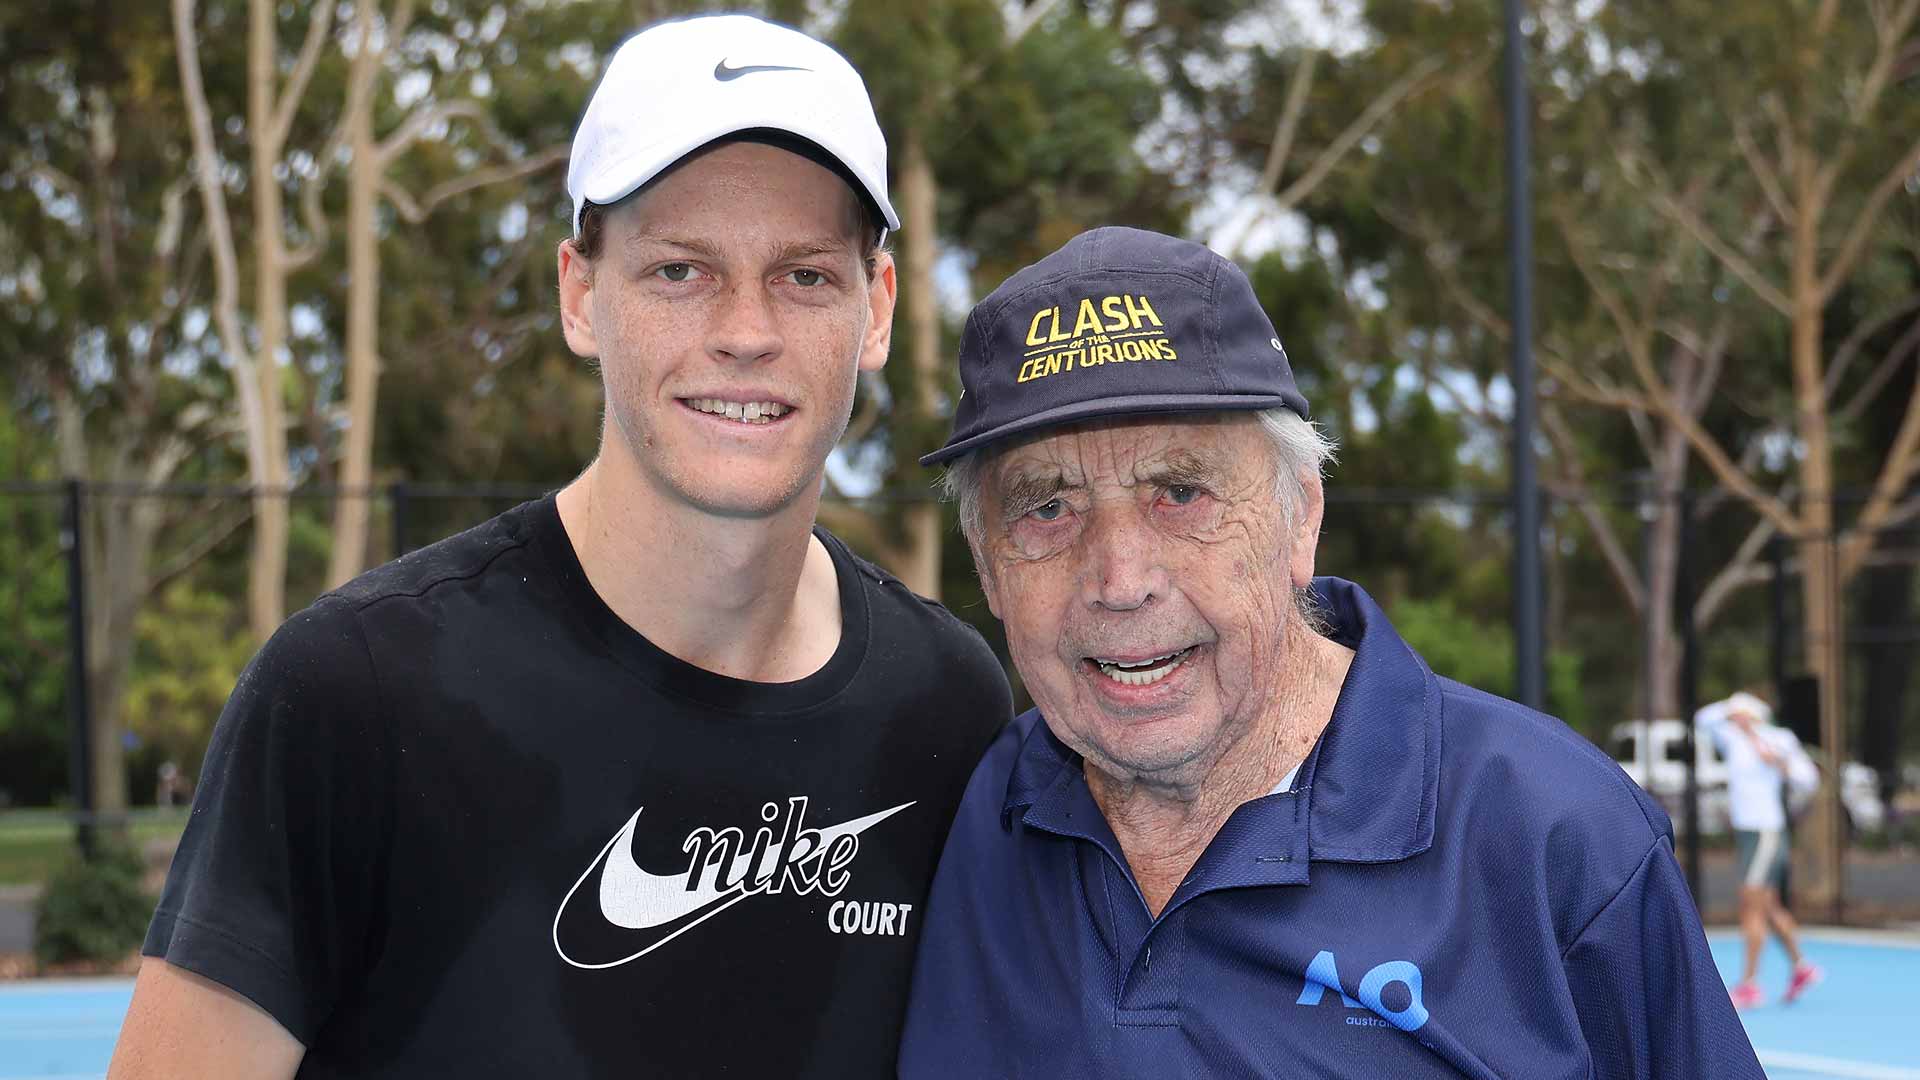 Twenty-one-year-old Jannik Sinner and 99-year-old Henry Smith share a hit in Adelaide.